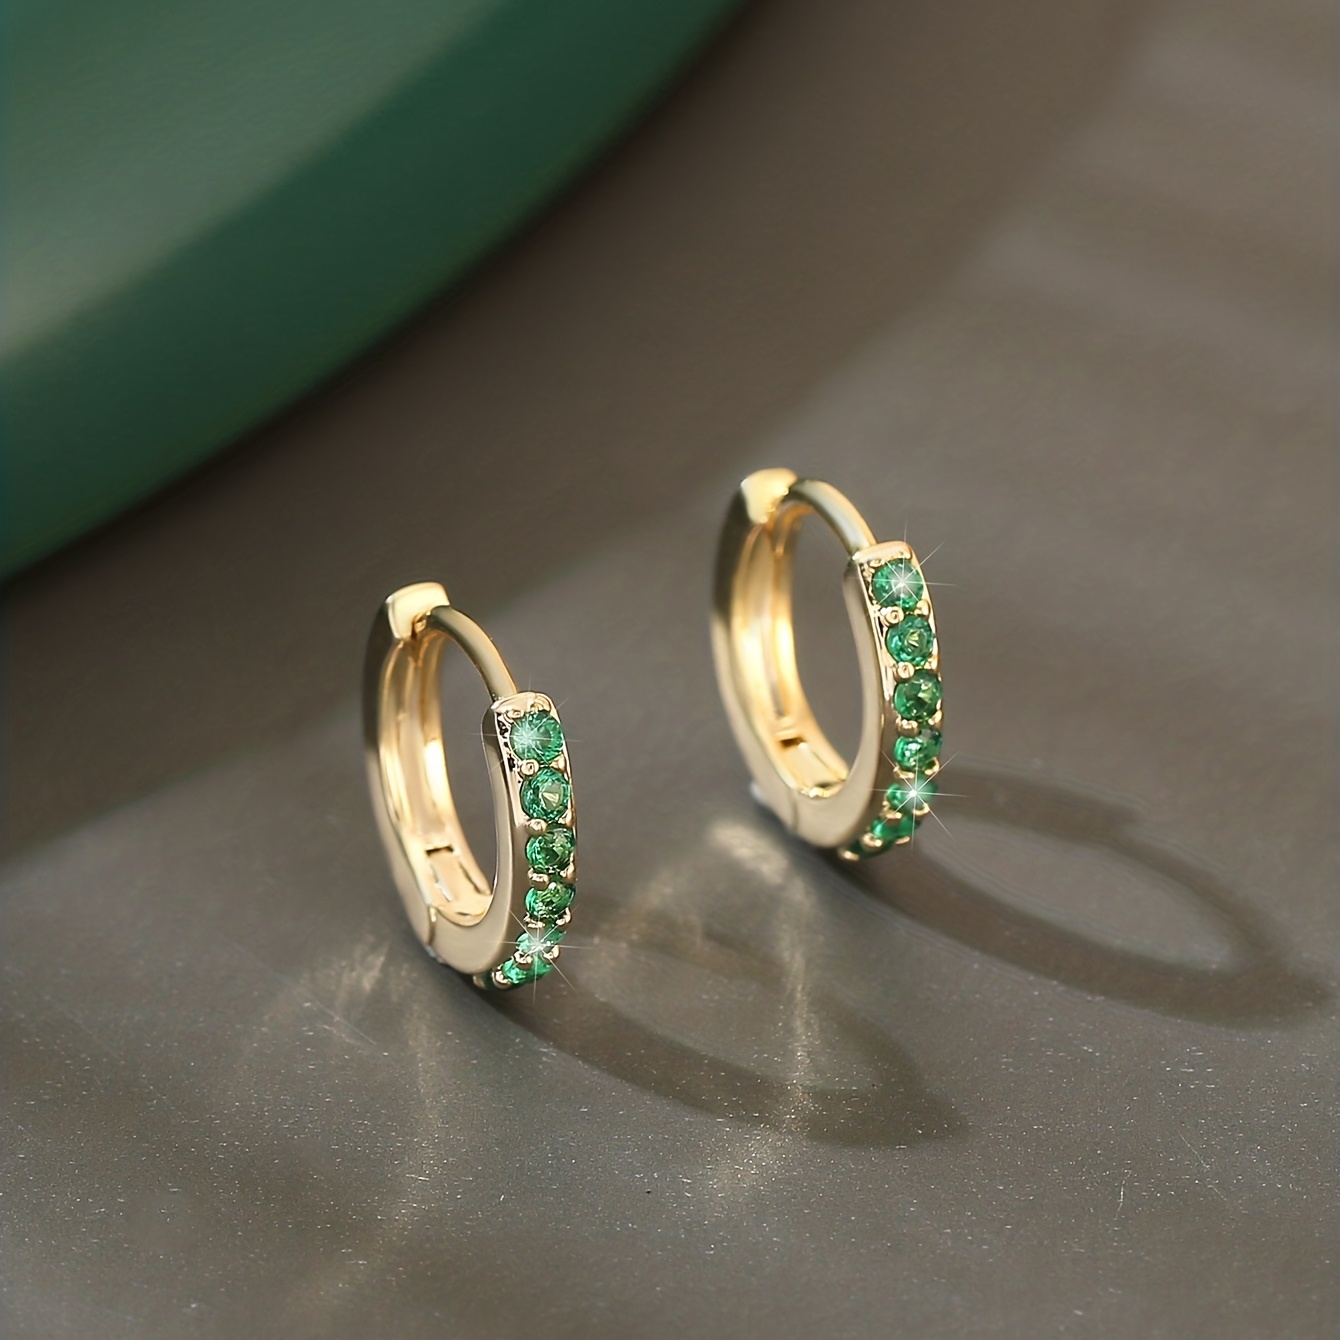 

Tiny Delicate Hoop Earrings Full Of Green Zircon Bohemian Vintage Style Exquisite Gifts For Women Party Ear Ornaments